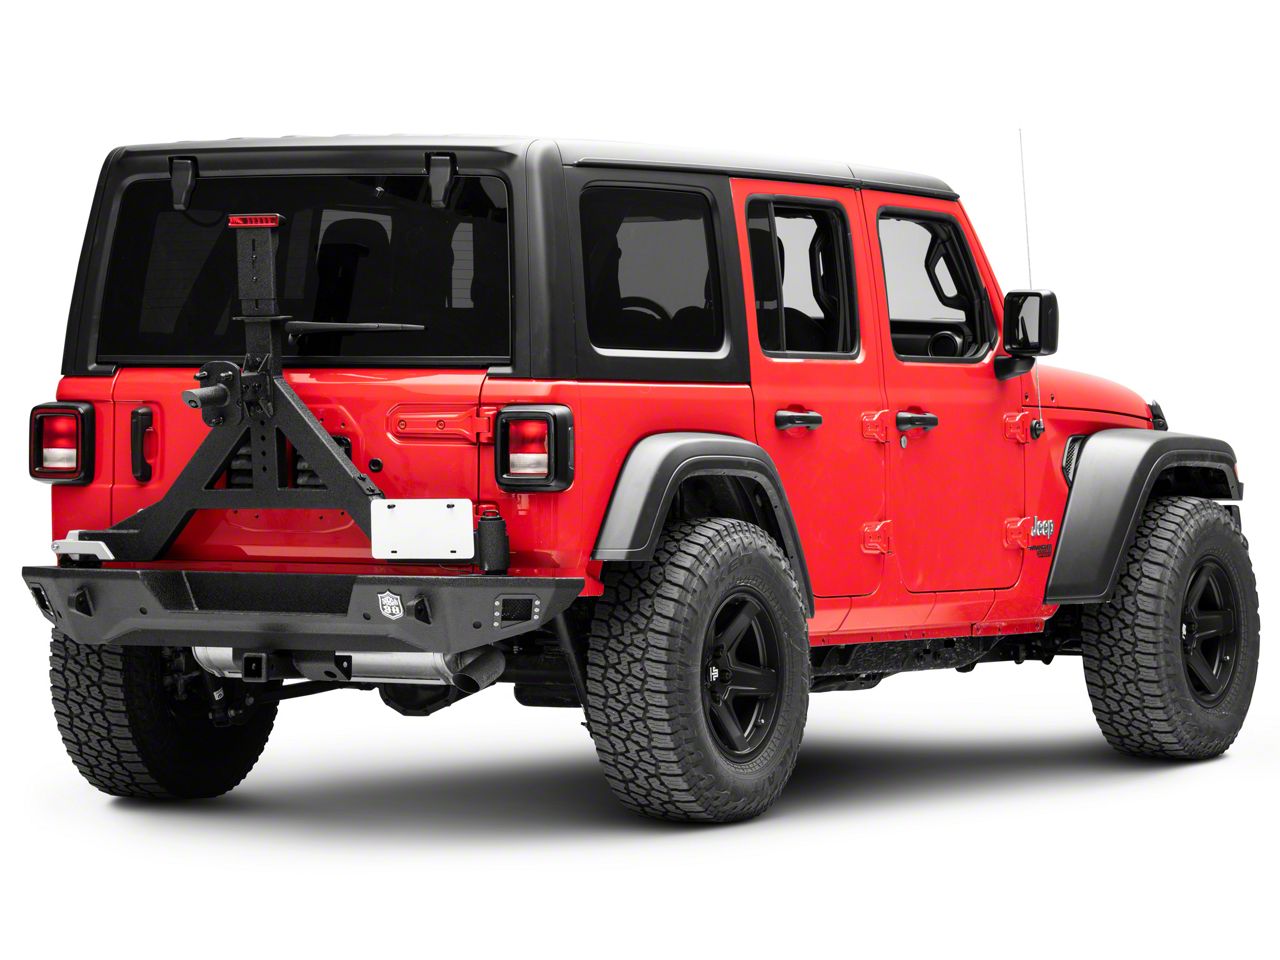 Deegan 38 Jeep Wrangler Rear Bumper with Tire Carrier; Pre-Drilled for  Backup Sensors J138941-JL (18-23 Jeep Wrangler JL) Free Shipping